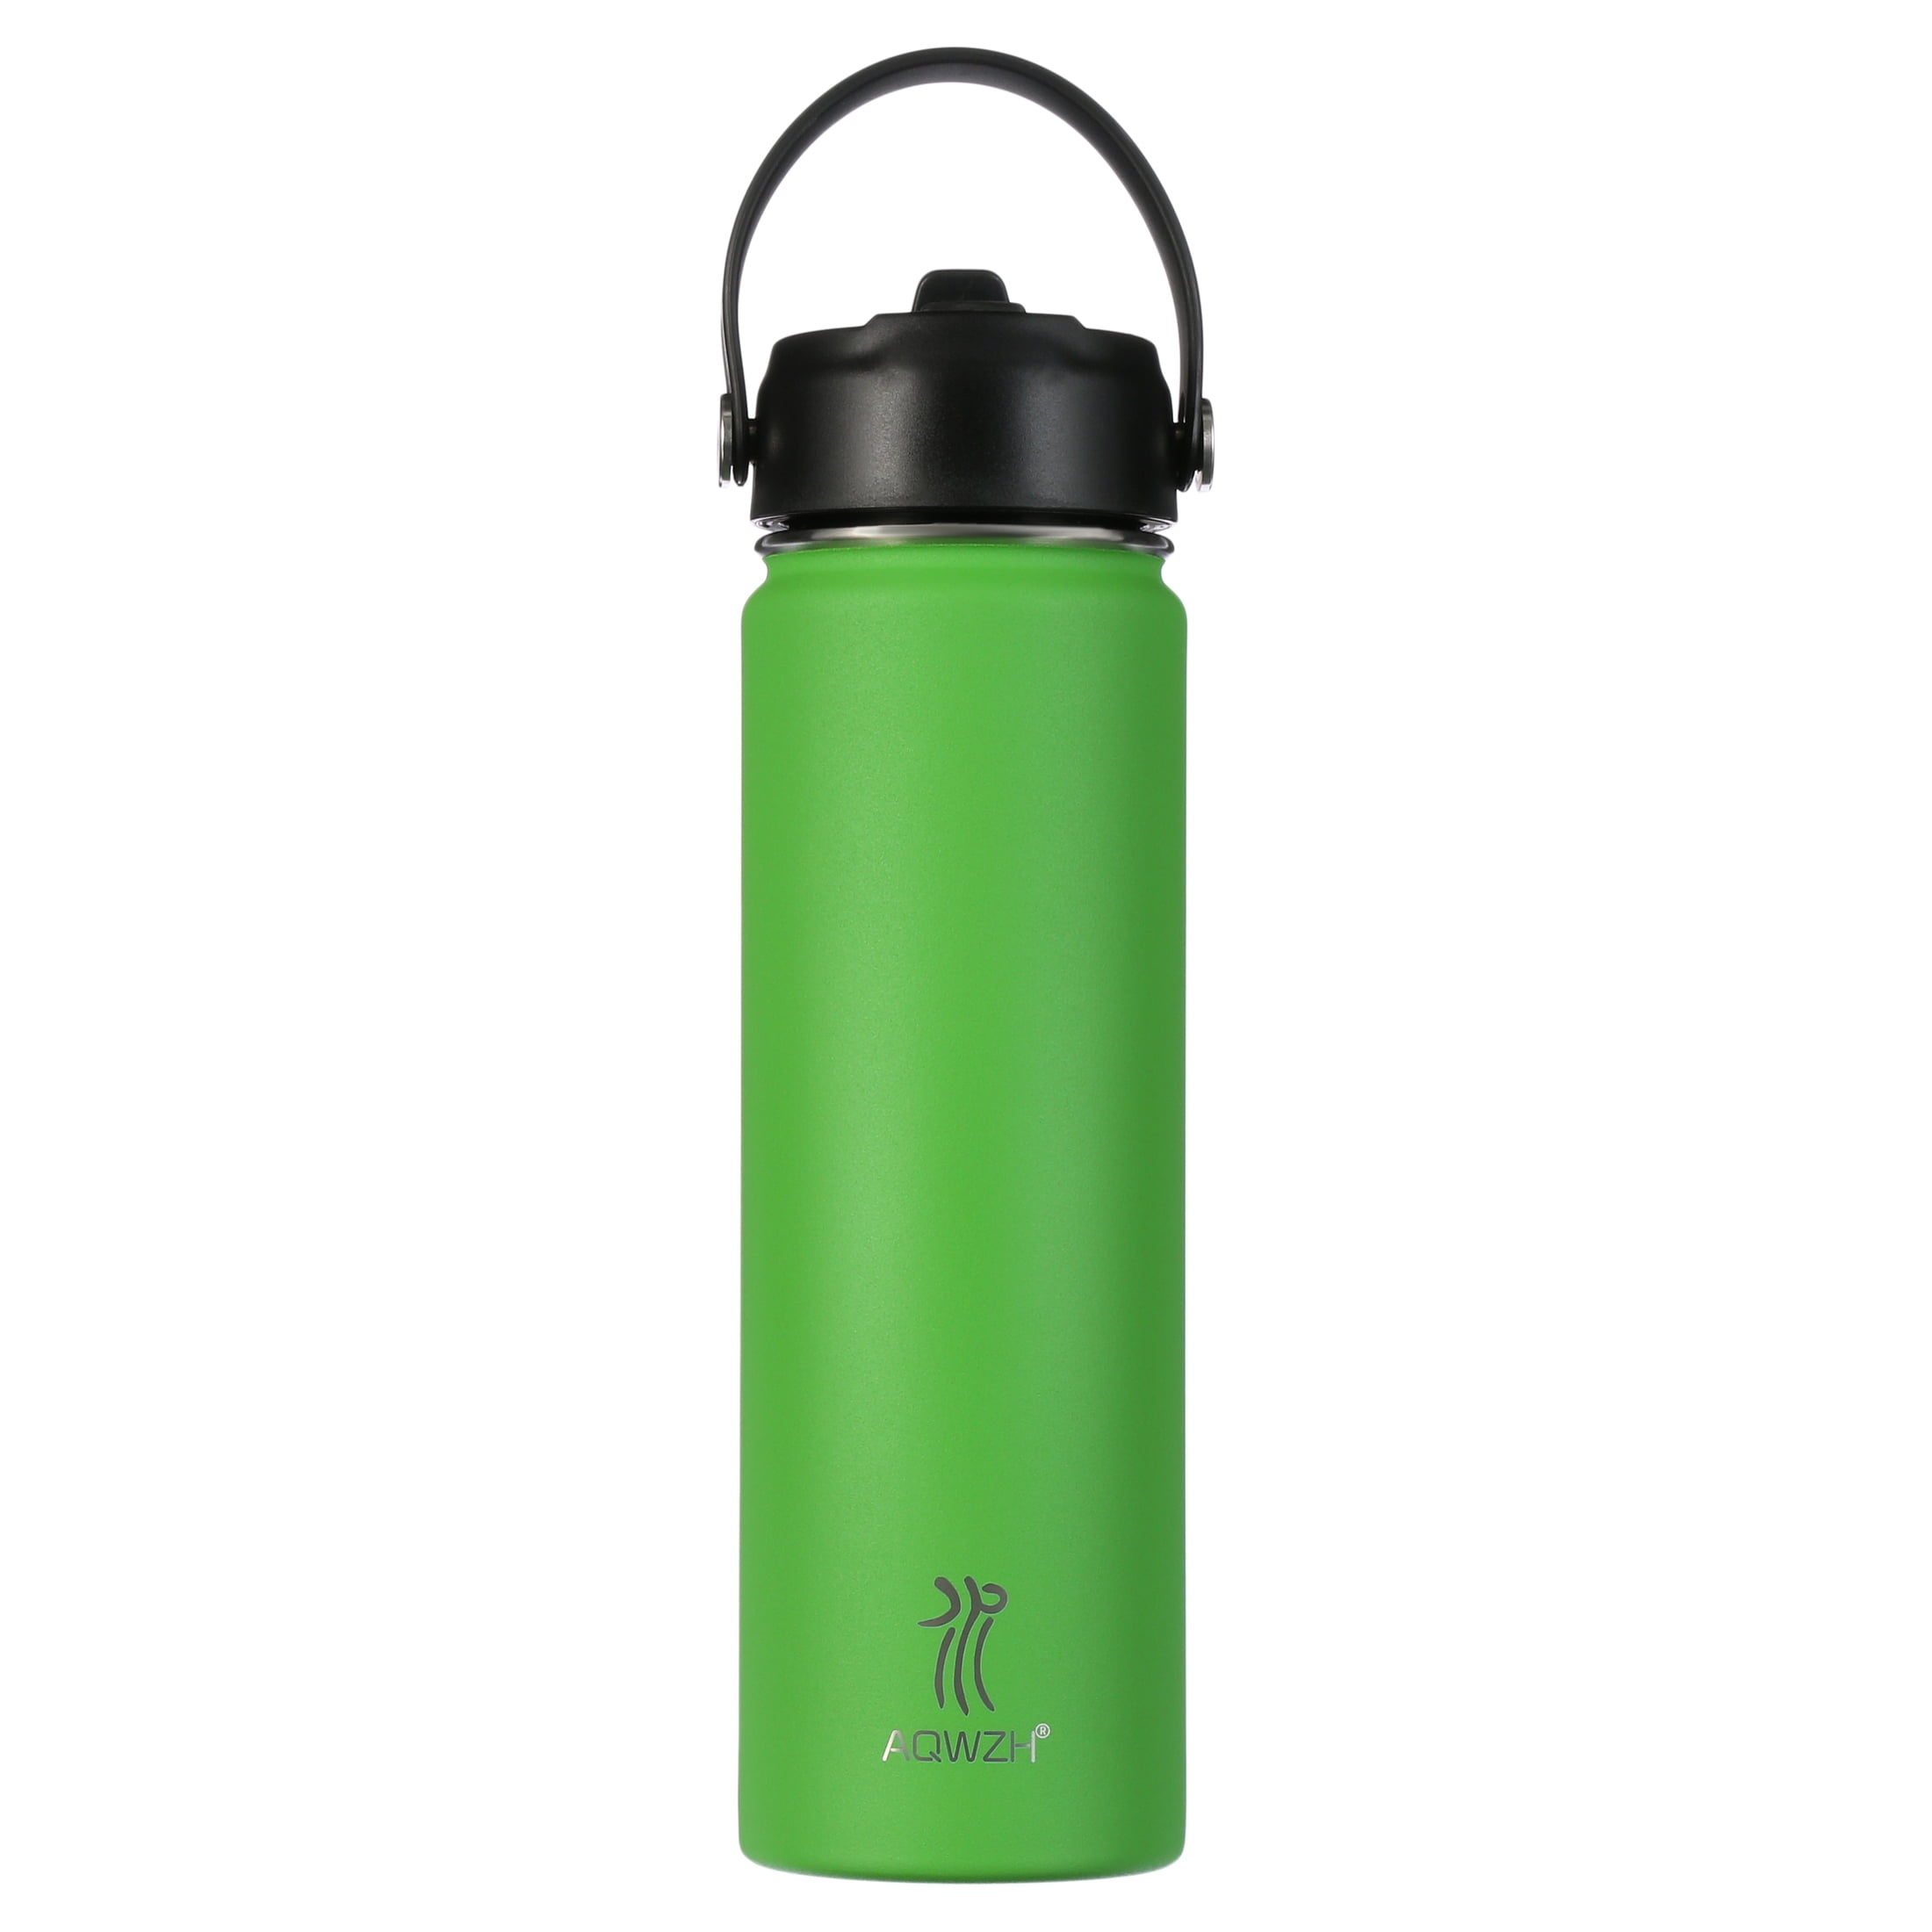 AQwzh 20 oz Green Stainless Steel Water Bottle with Wide mouth